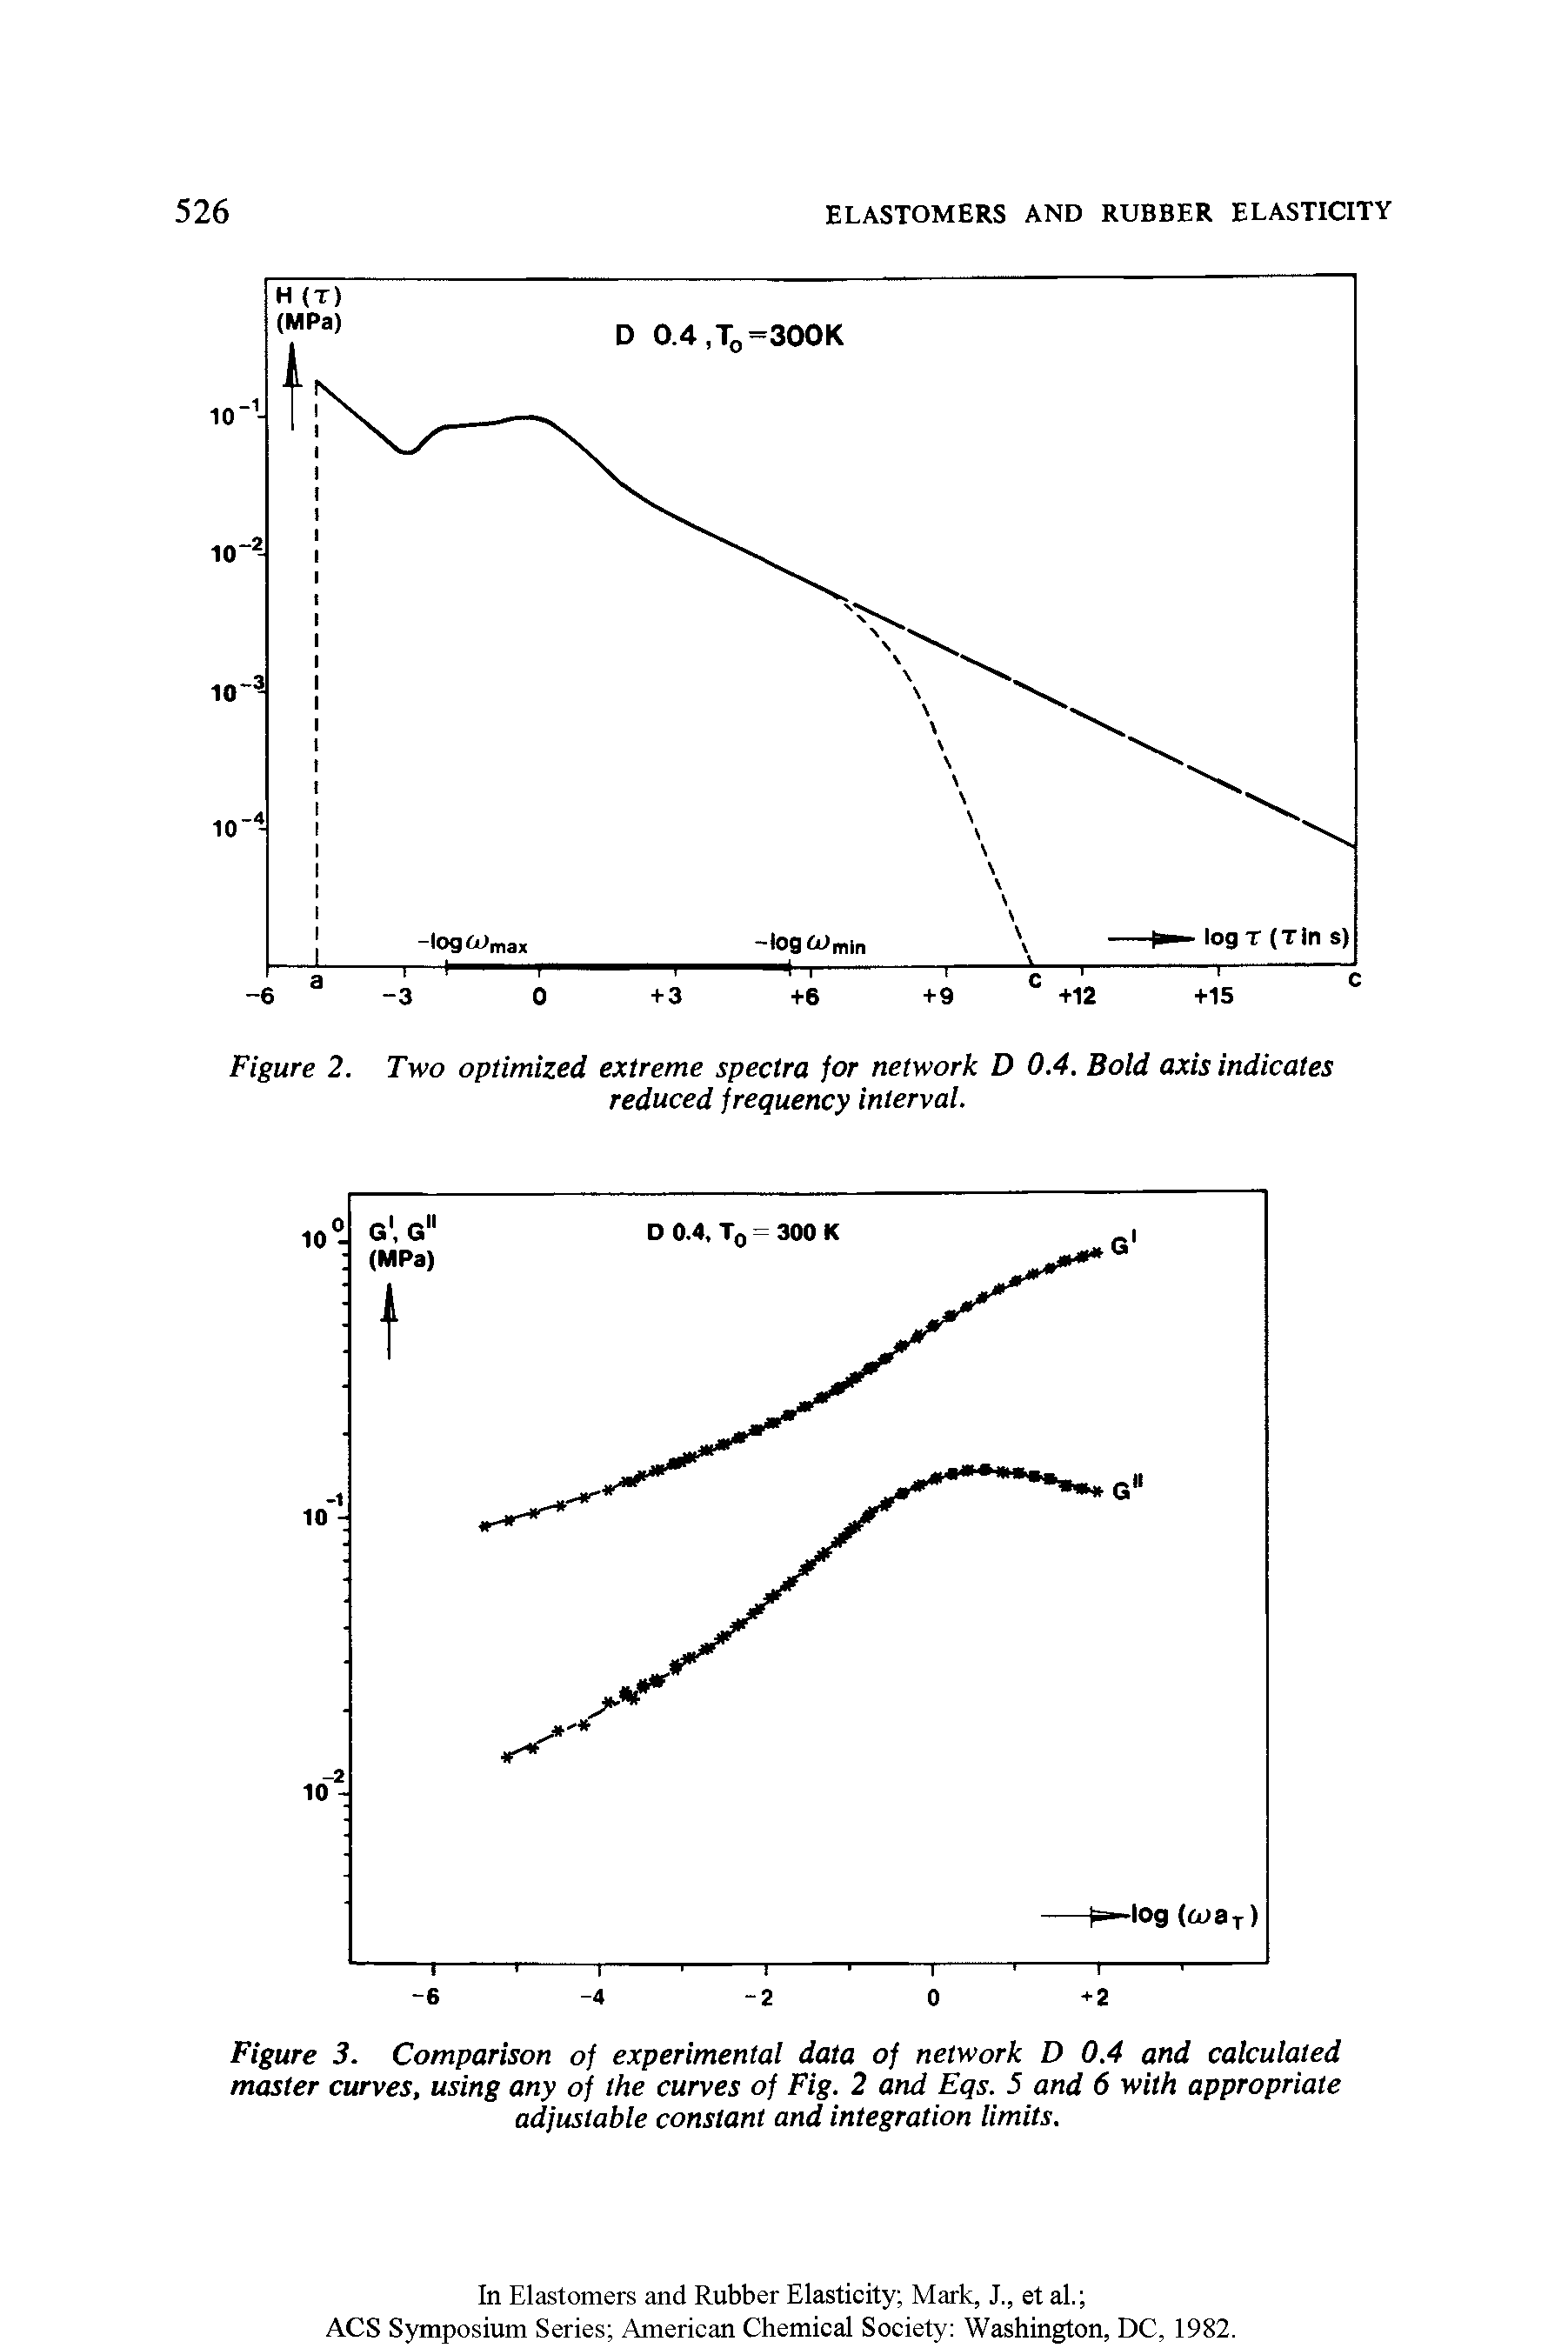 Figure 3. Comparison of experimental data of network D 0.4 and calculated master curves, using any of the curves of Fig. 2 and Eqs. 5 and 6 with appropriate adjustable constant and integration limits.